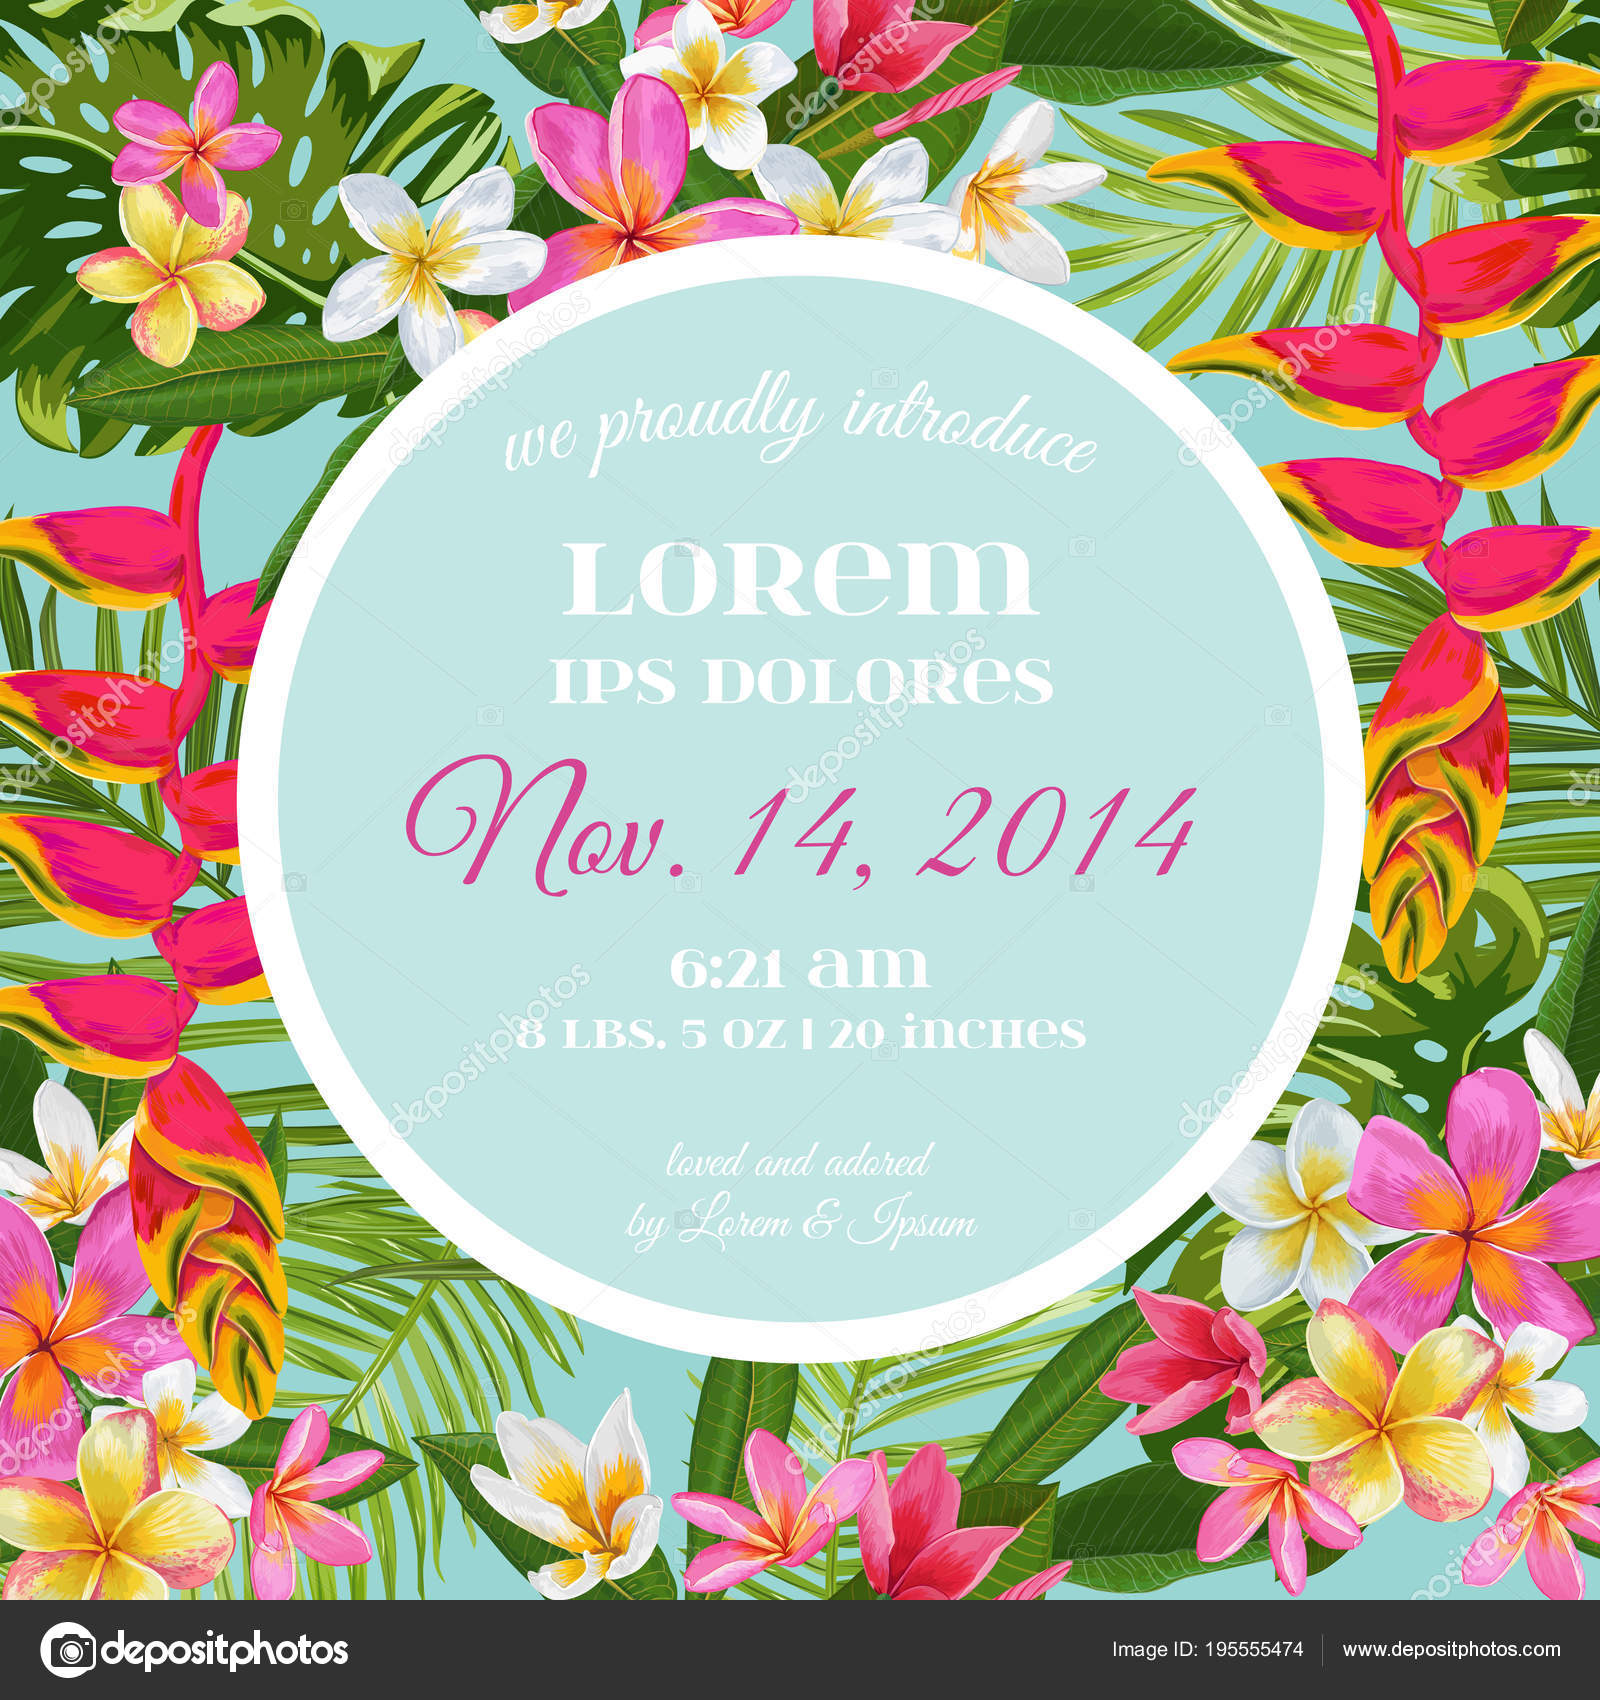 Wedding Invitation Template with Flowers. Tropical Floral Save the Date ...